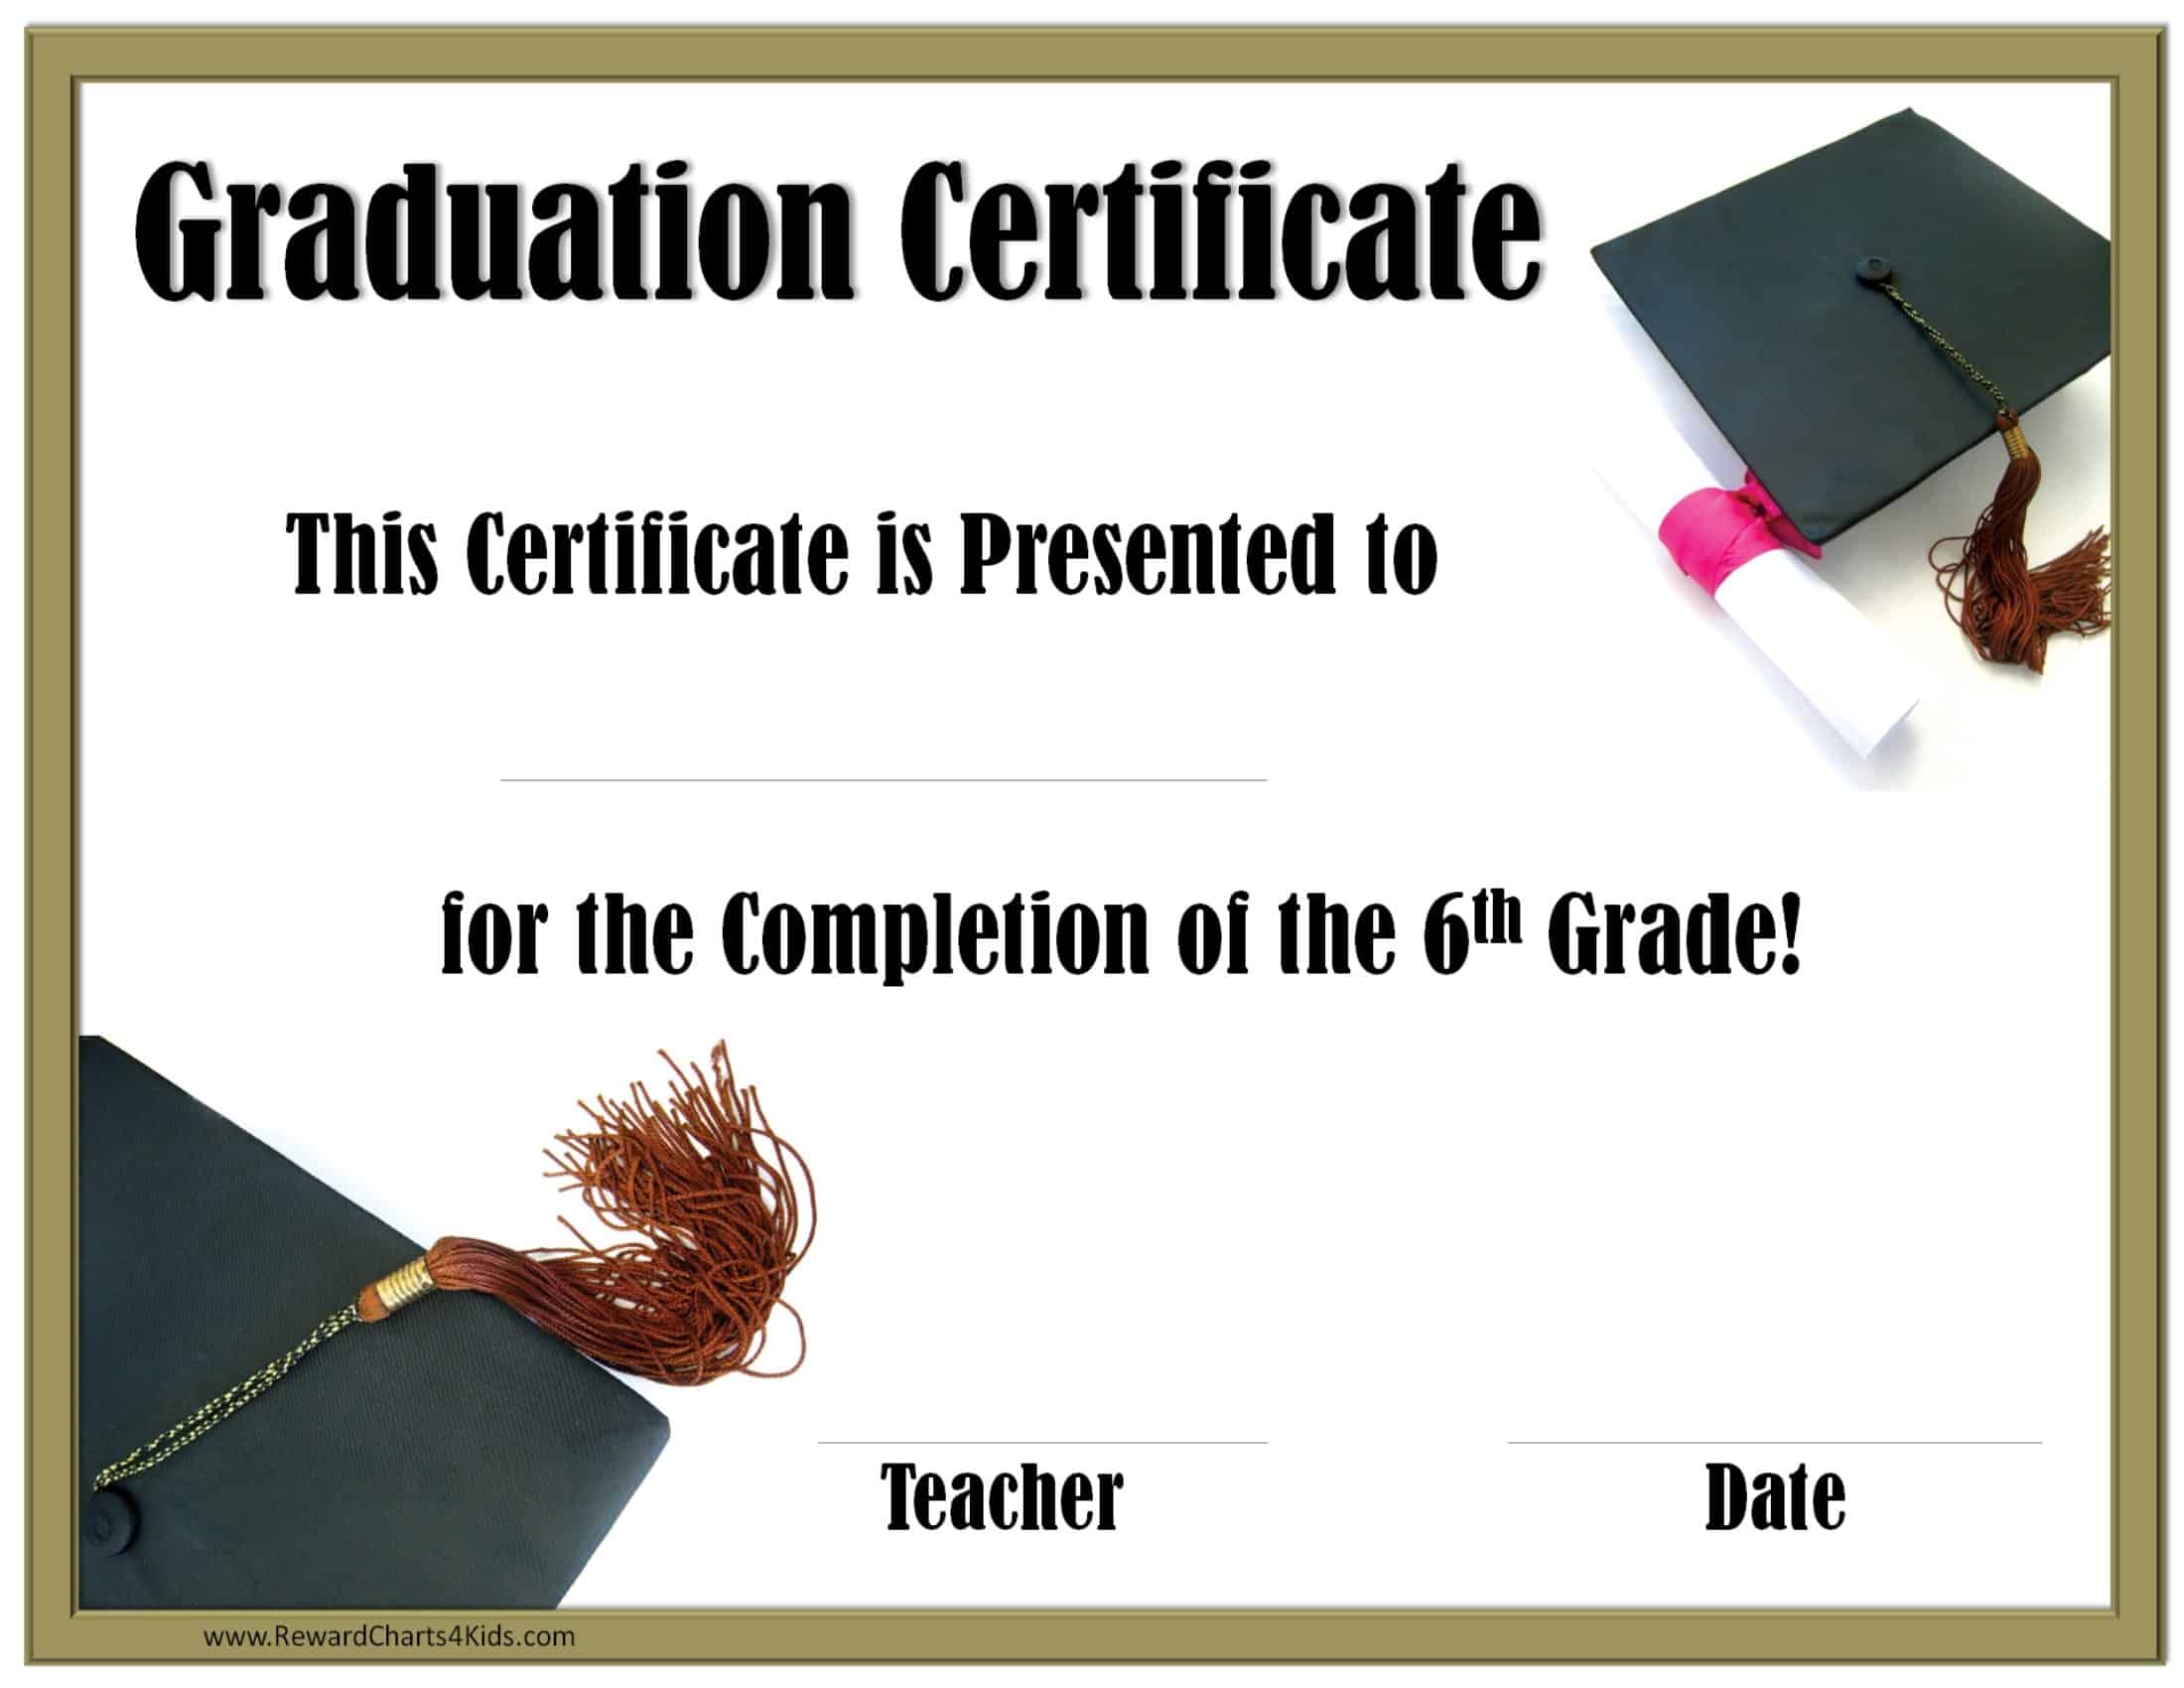 School Graduation Certificates Customize Online With Or Without A Photo